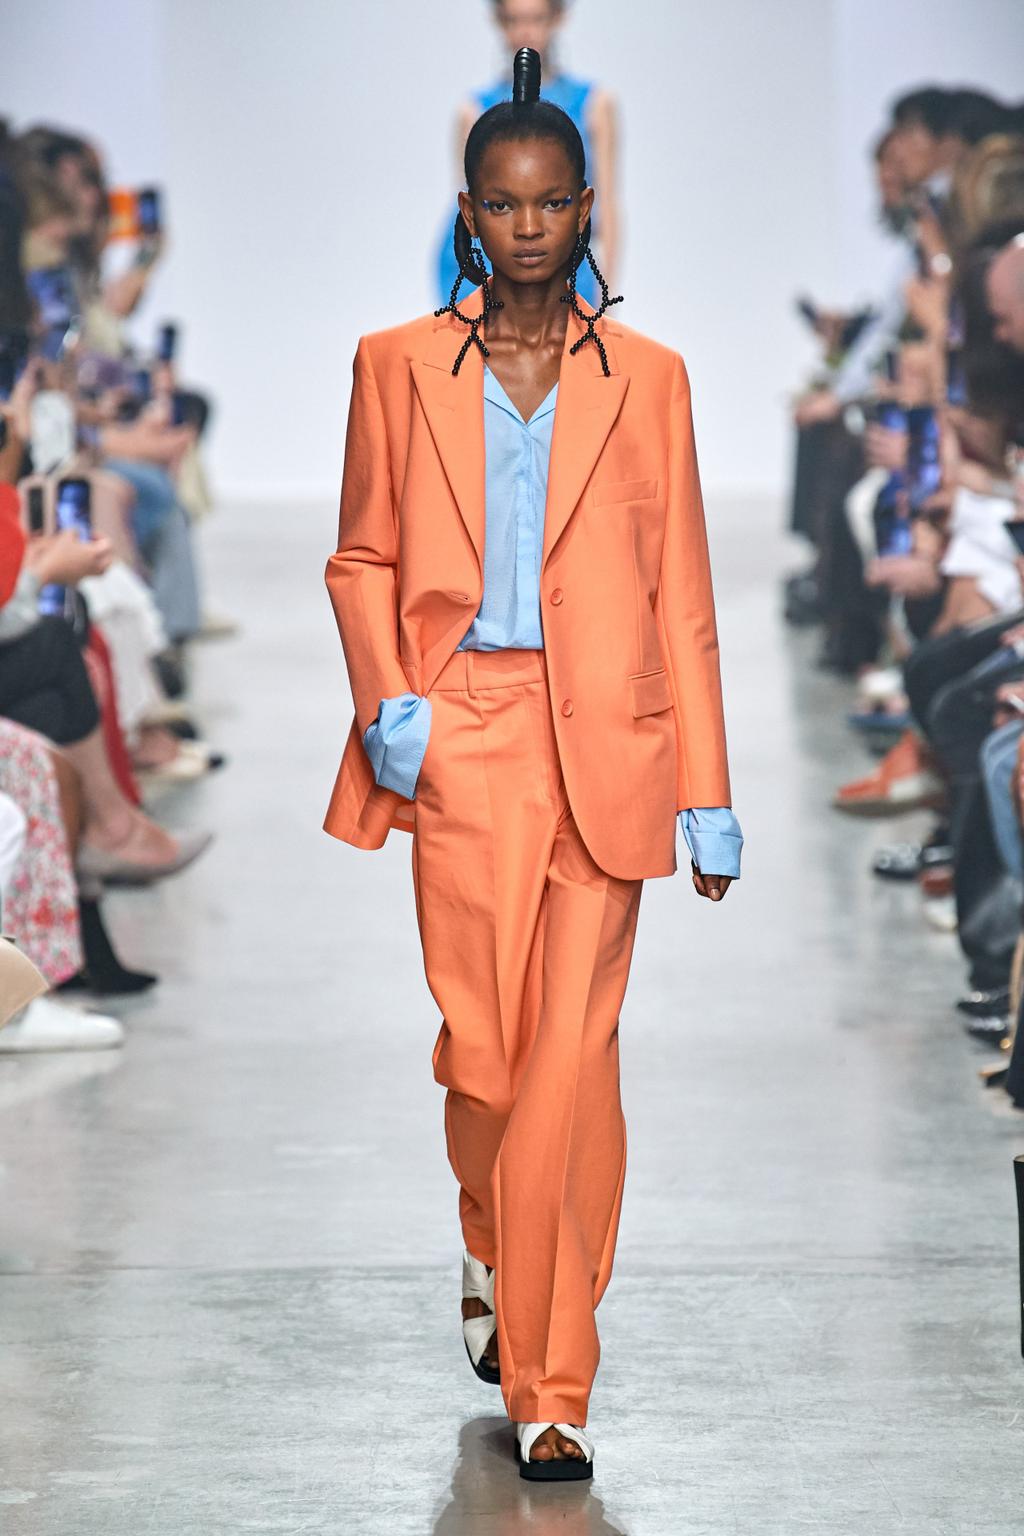 Bra -Top Trend / Spring 2020 Outfits  2020 fashion trends, Fashion show,  Ready to wear